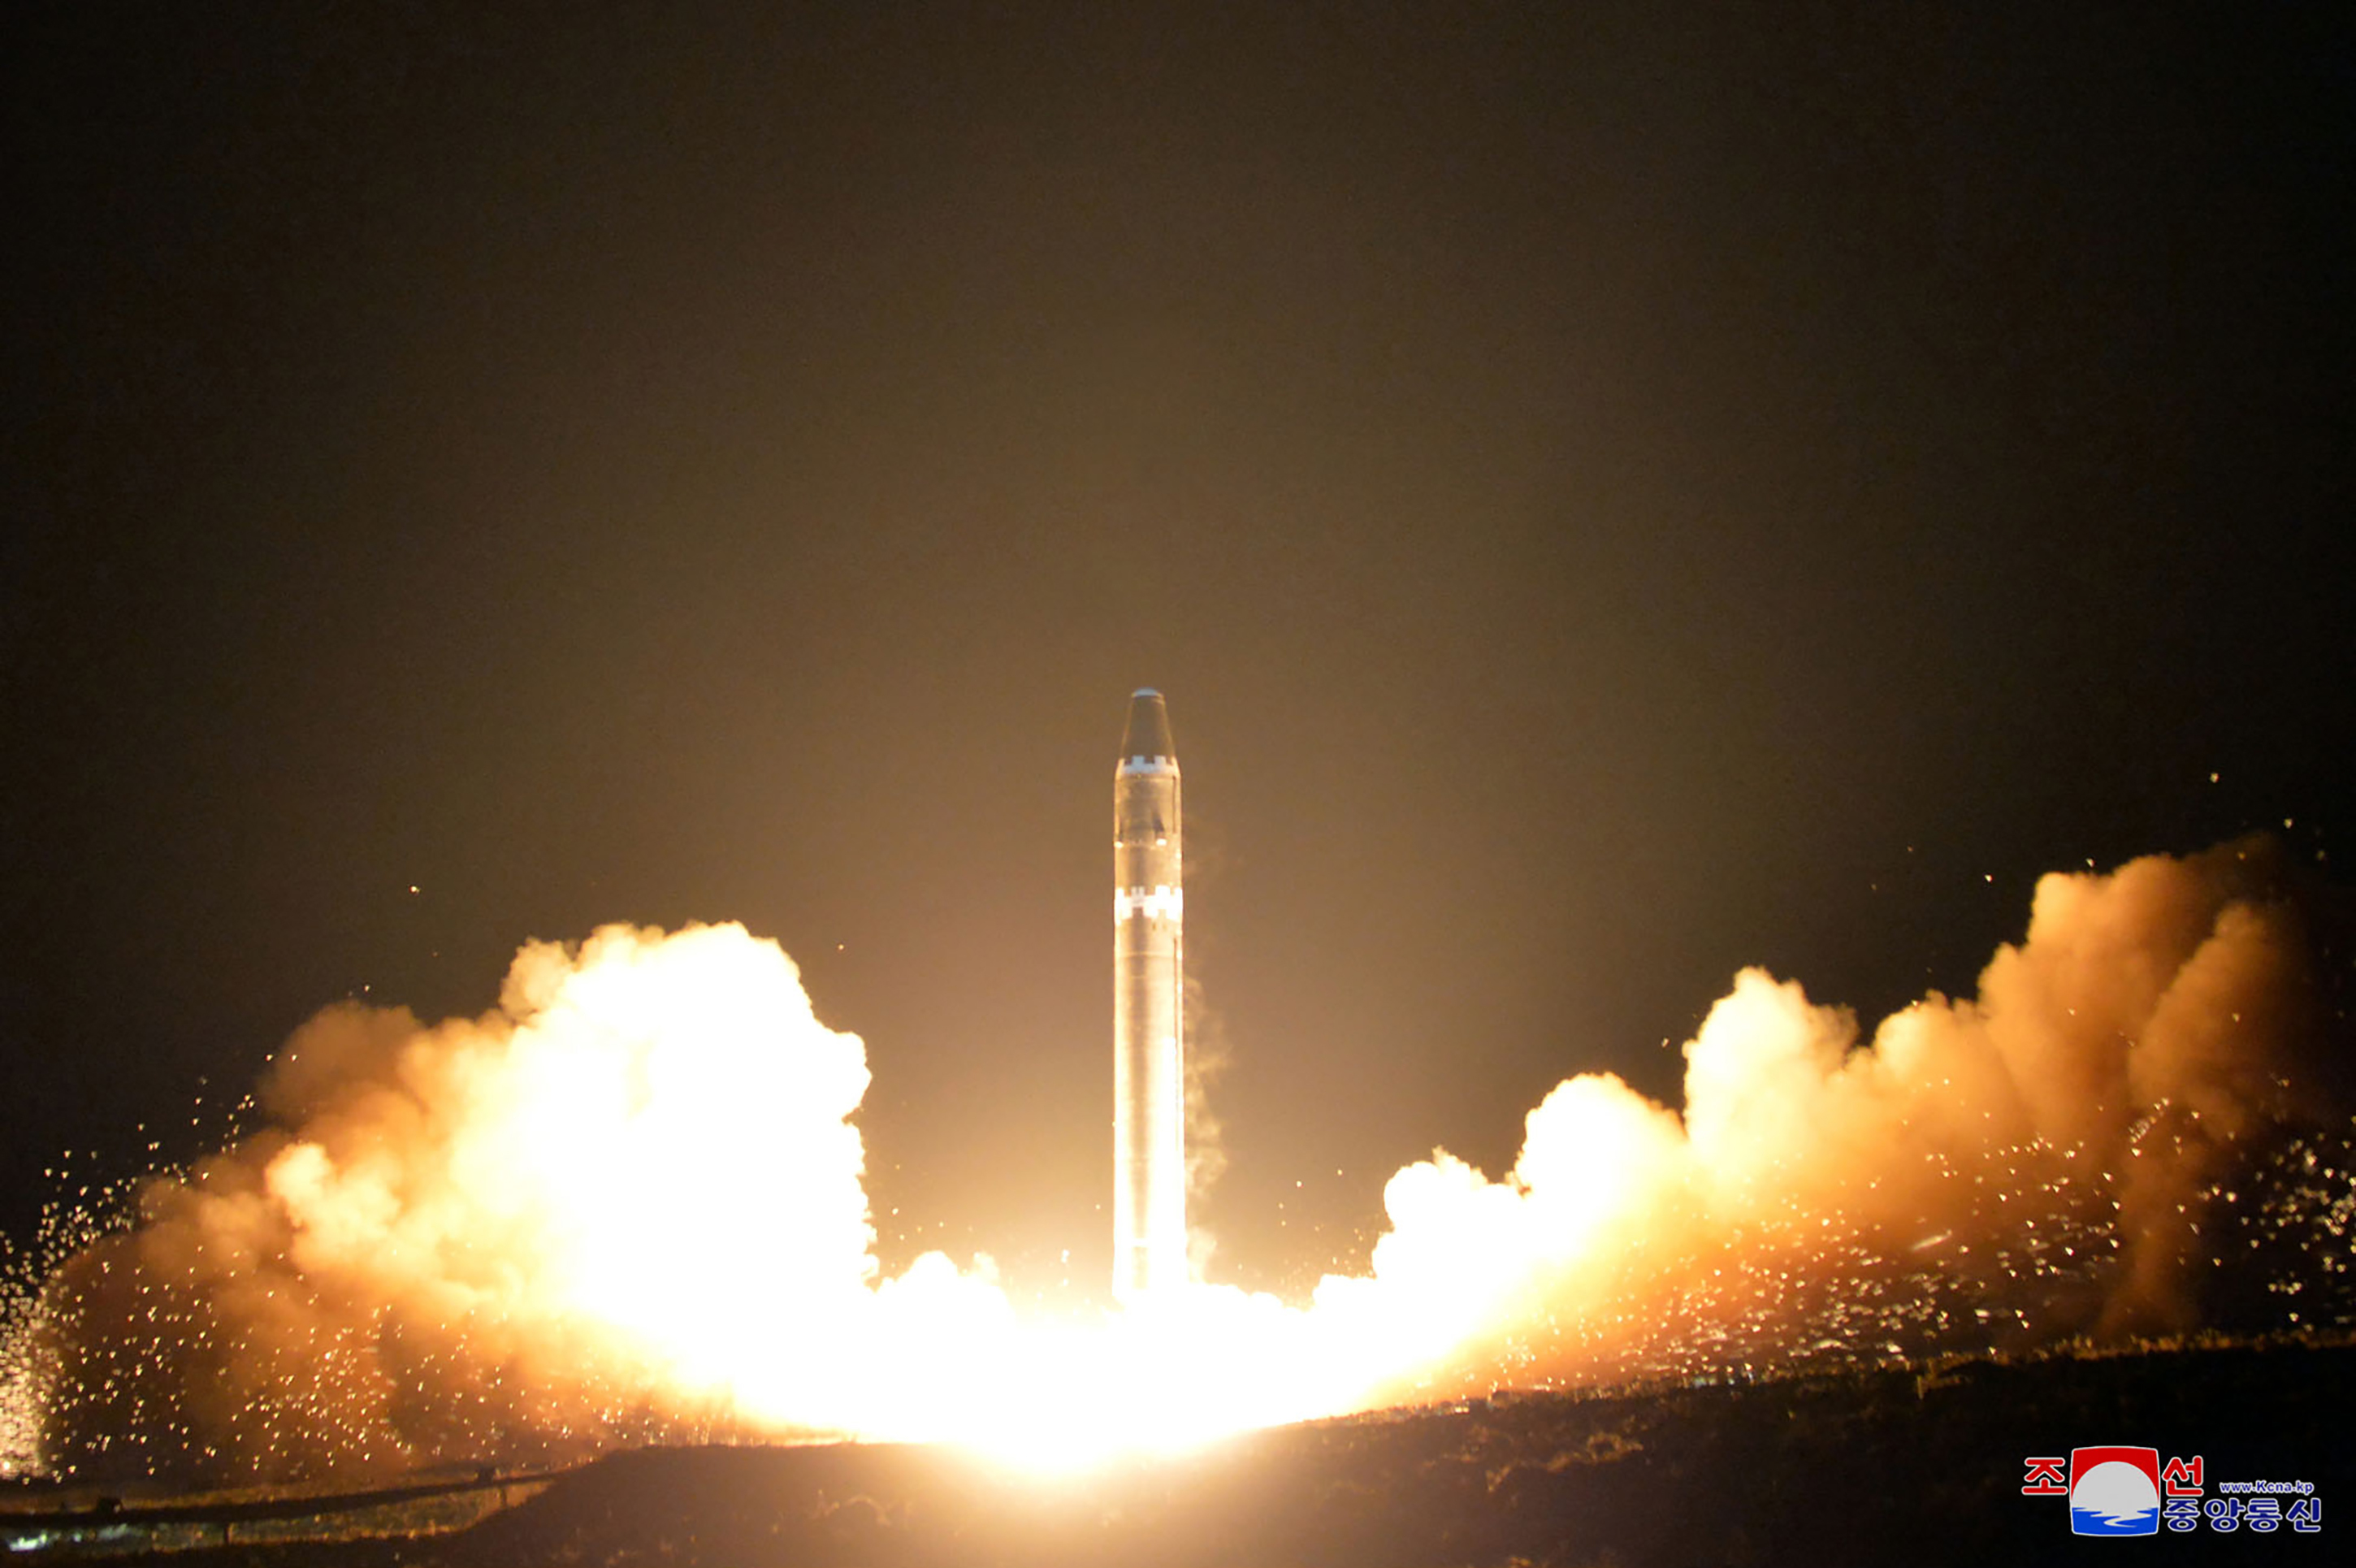 This photo released on November 30, 2017 by North Korea's official Korean Central News Agency (KCNA) shows launching of the Hwasong-15 missile. (KCNA VIA KNS&mdash;AFP/Getty Images)